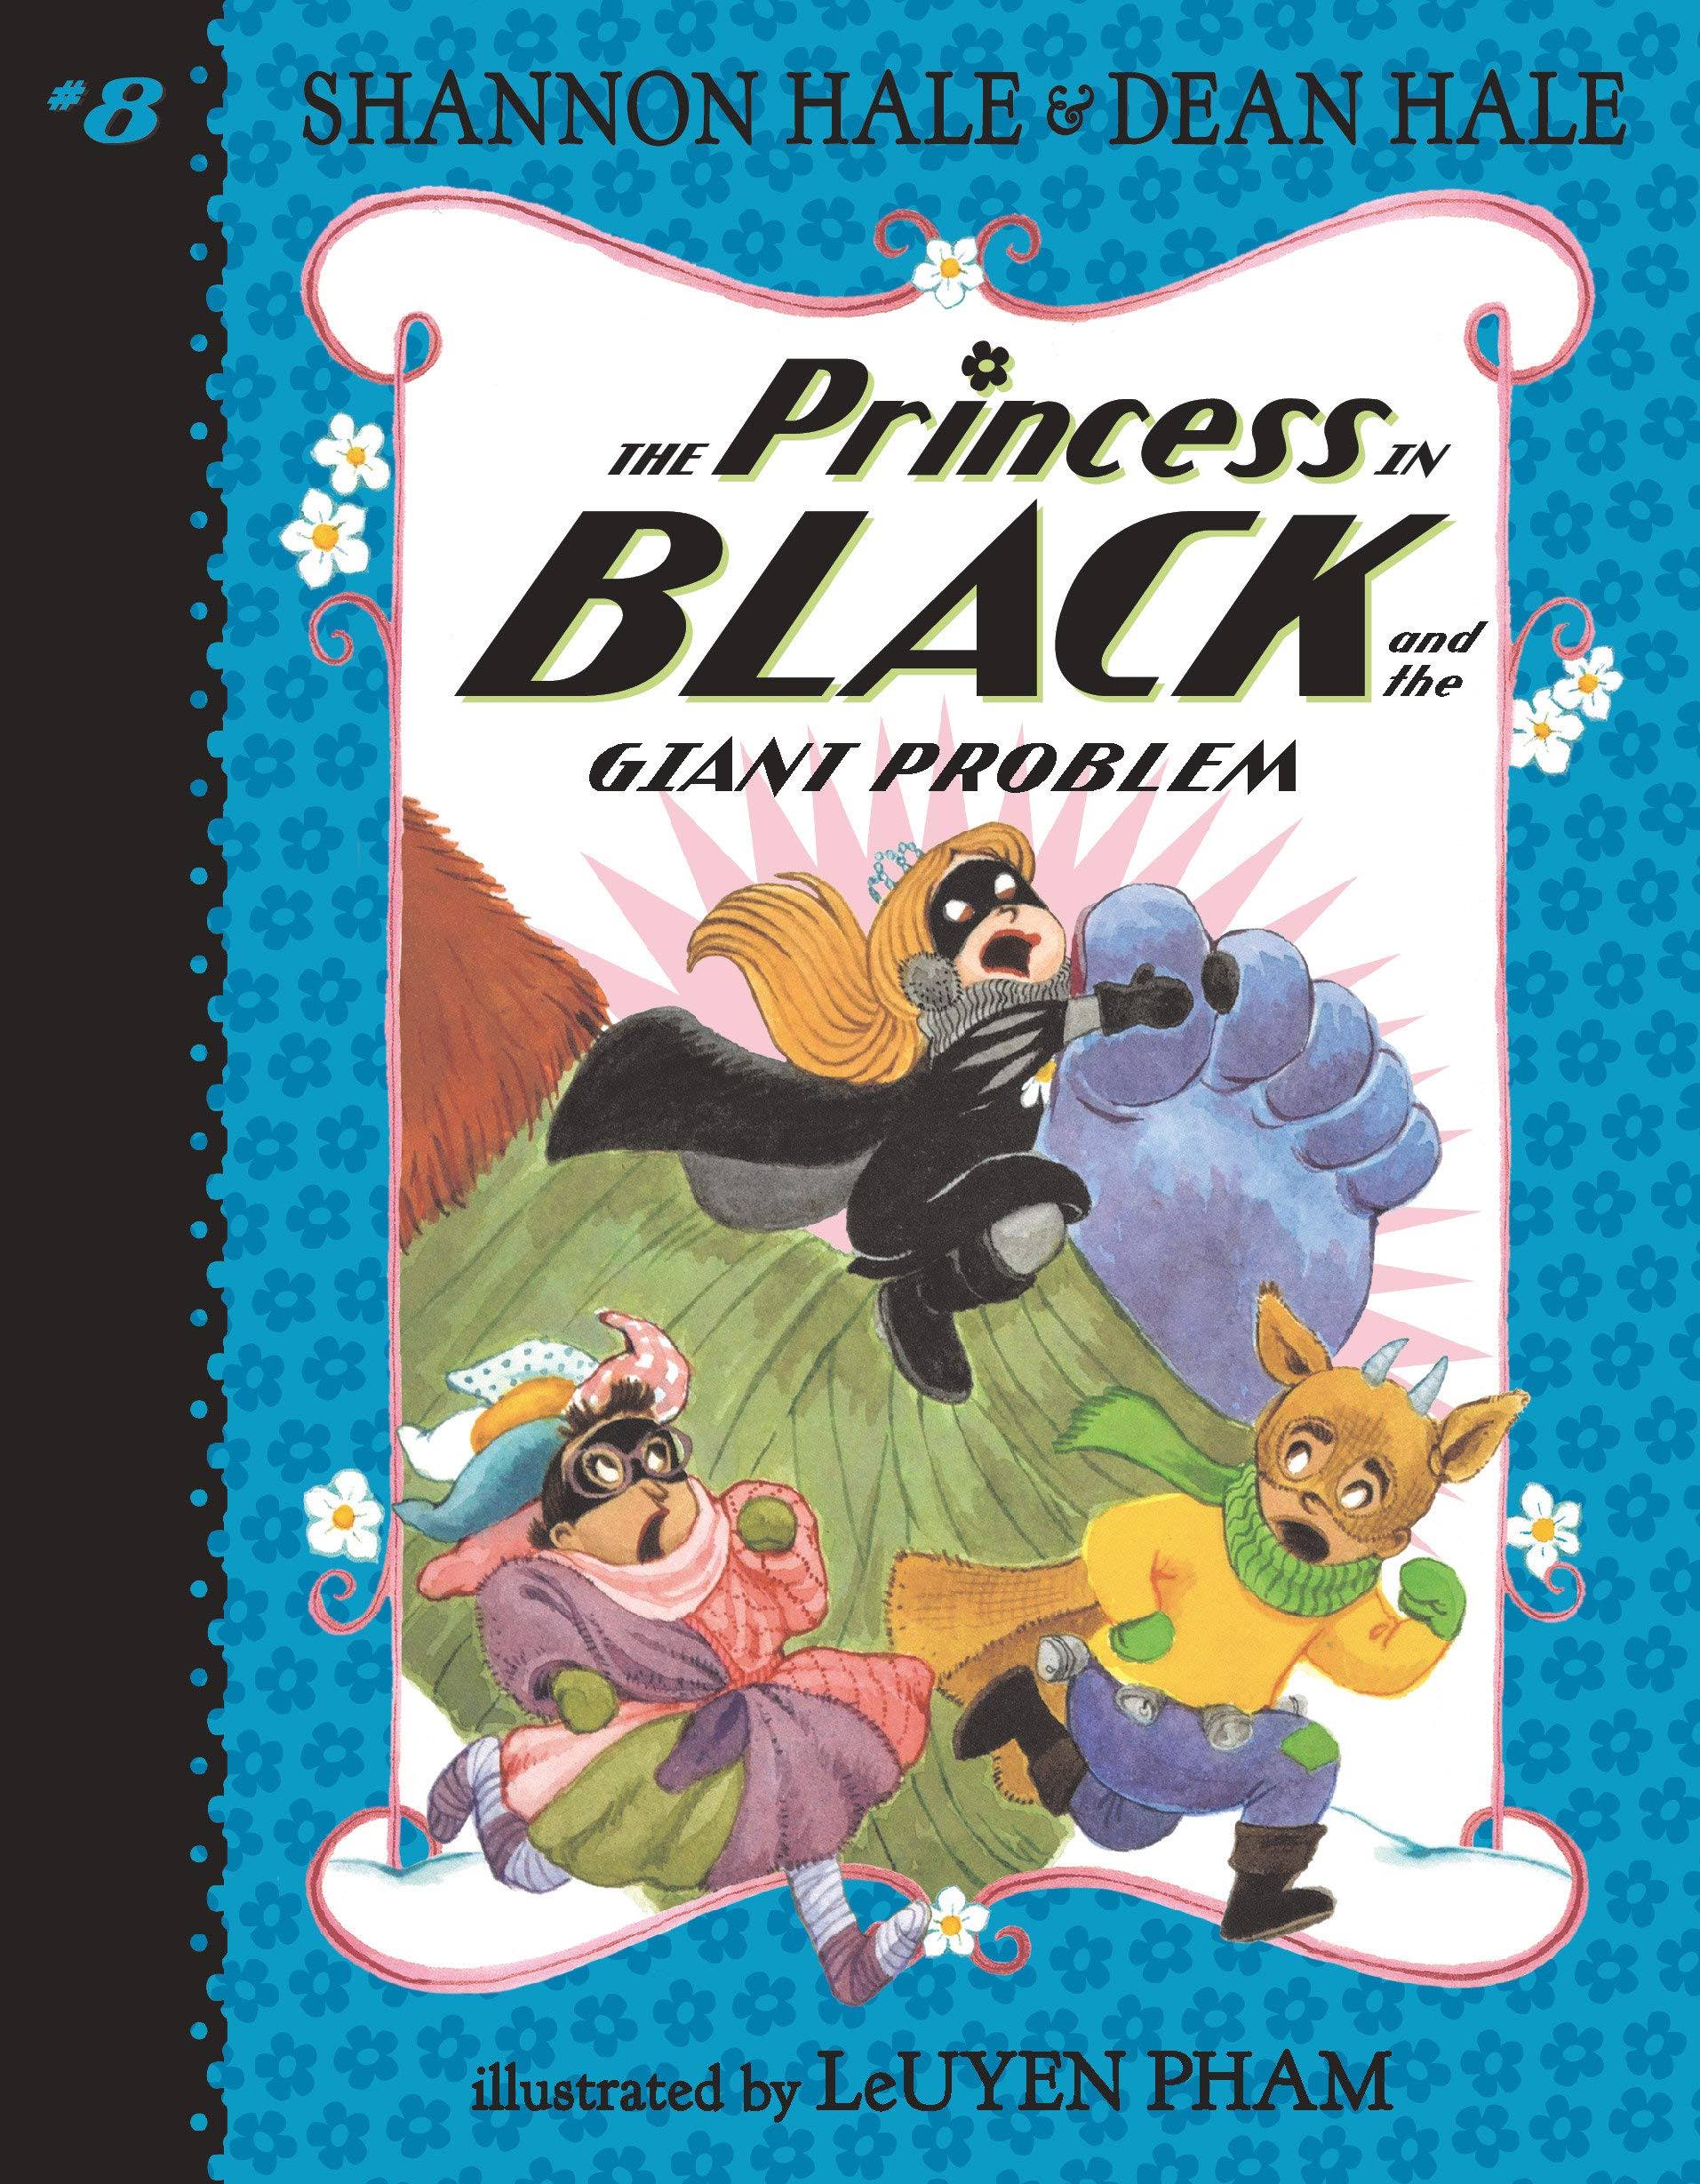 The Princess in Black and The Giant Problem by Shannon Hale